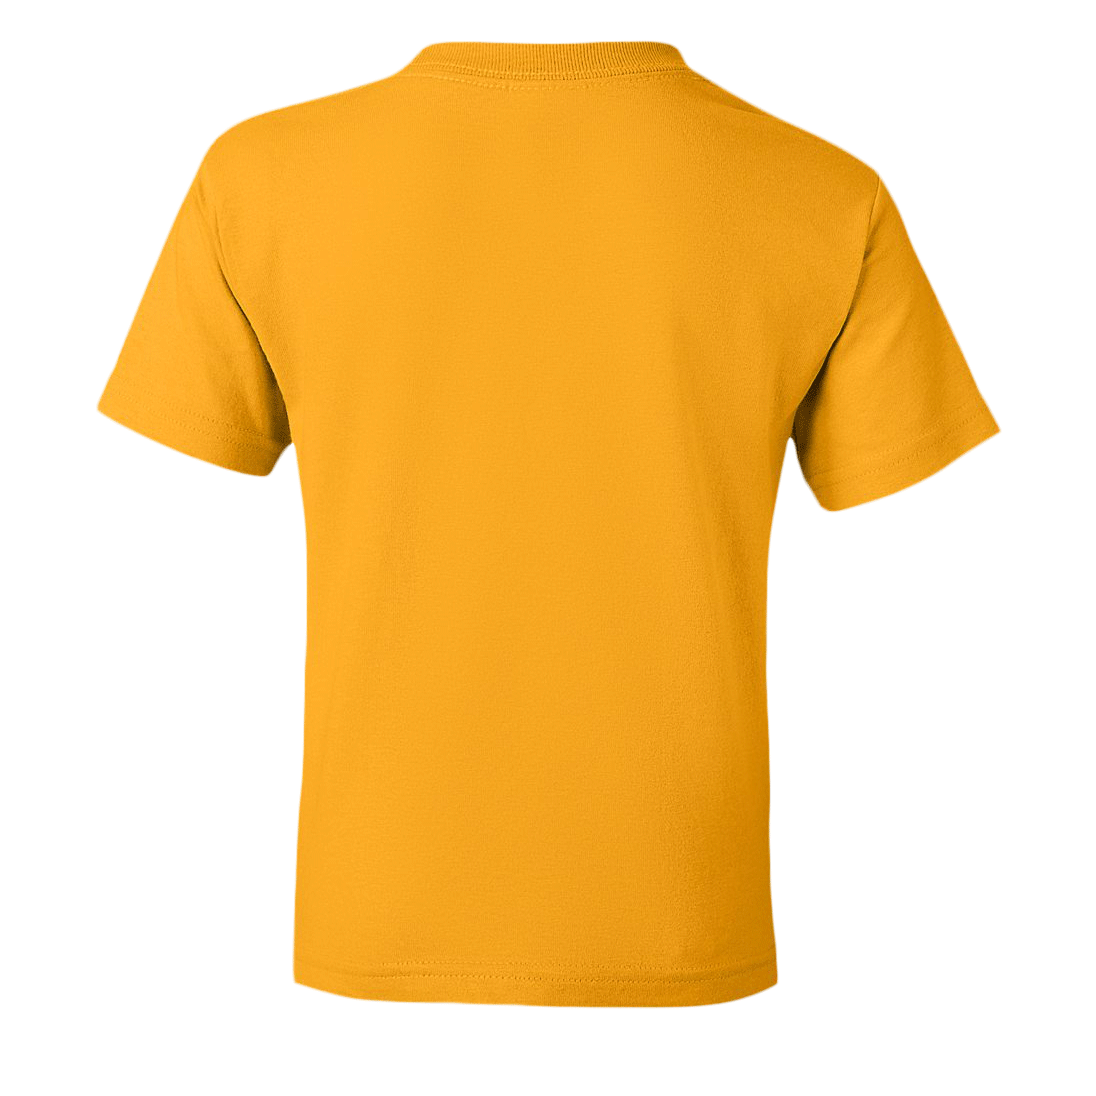 133,100+ Yellow Shirt Stock Photos, Pictures & Royalty-Free Images